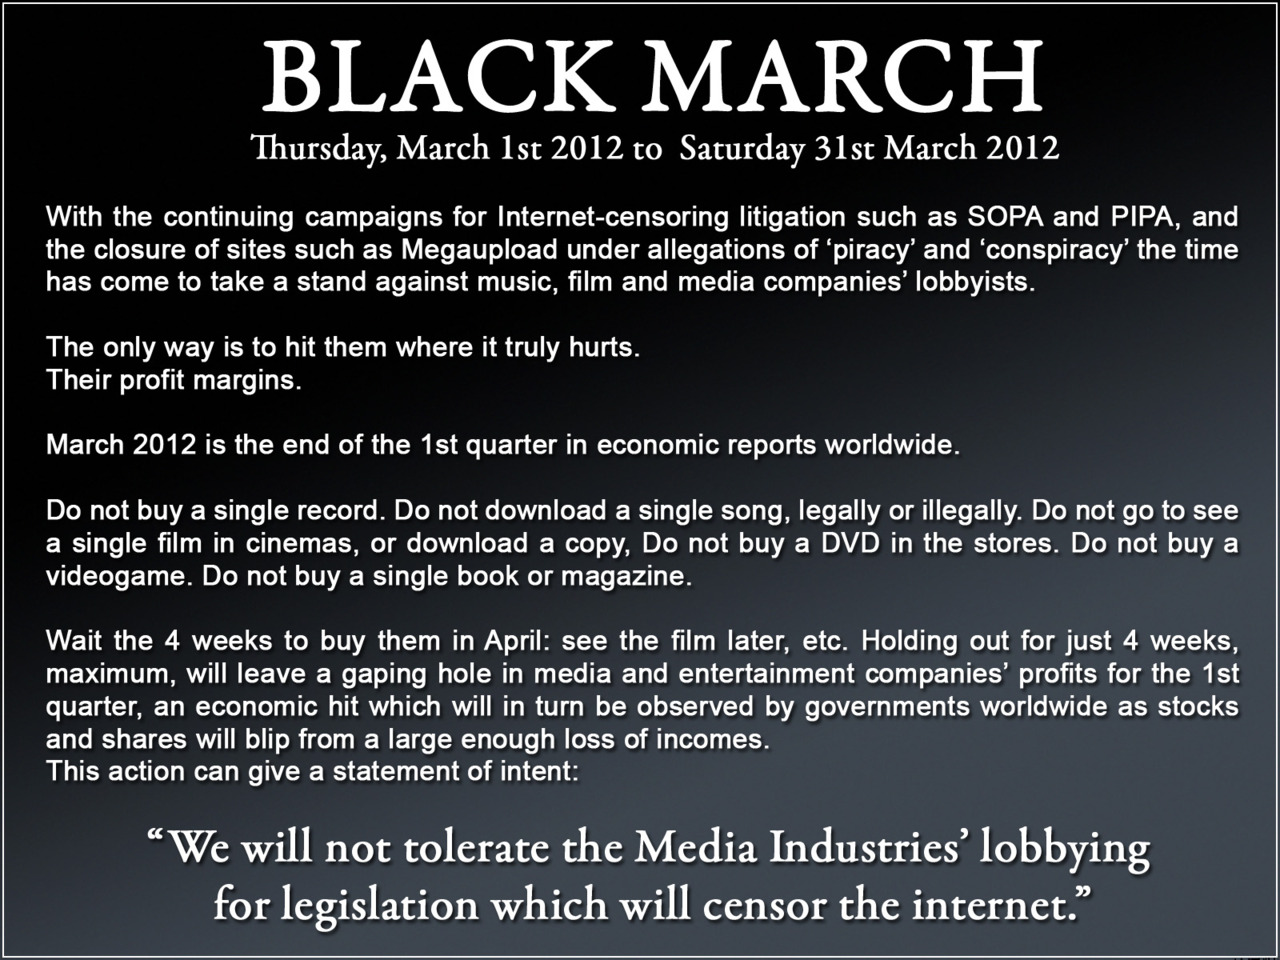 There will also be protests all across Europe on the 11th. There is also a world wide march on the Feb.27 for solidarity between all of the countries that have been fighting together for our general cause against government and corporate greed